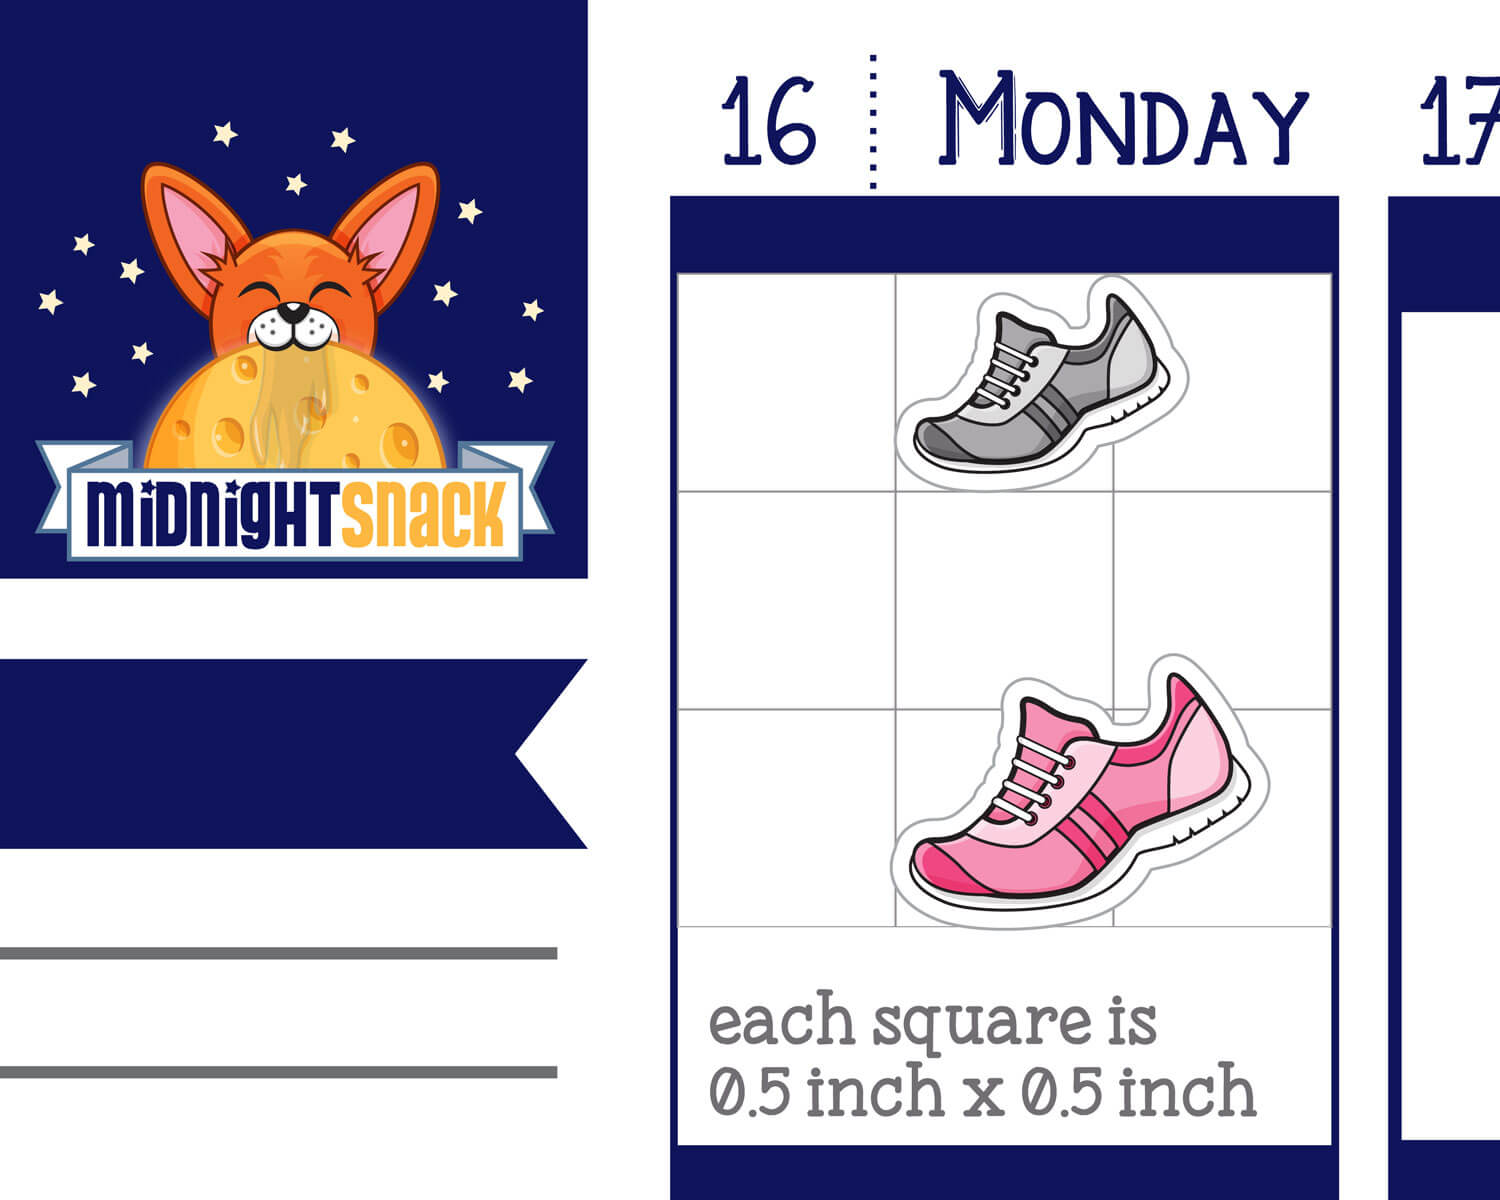 Running Shoe Icon: Fitness and Exercise Planner Stickers Midnight Snack Planner